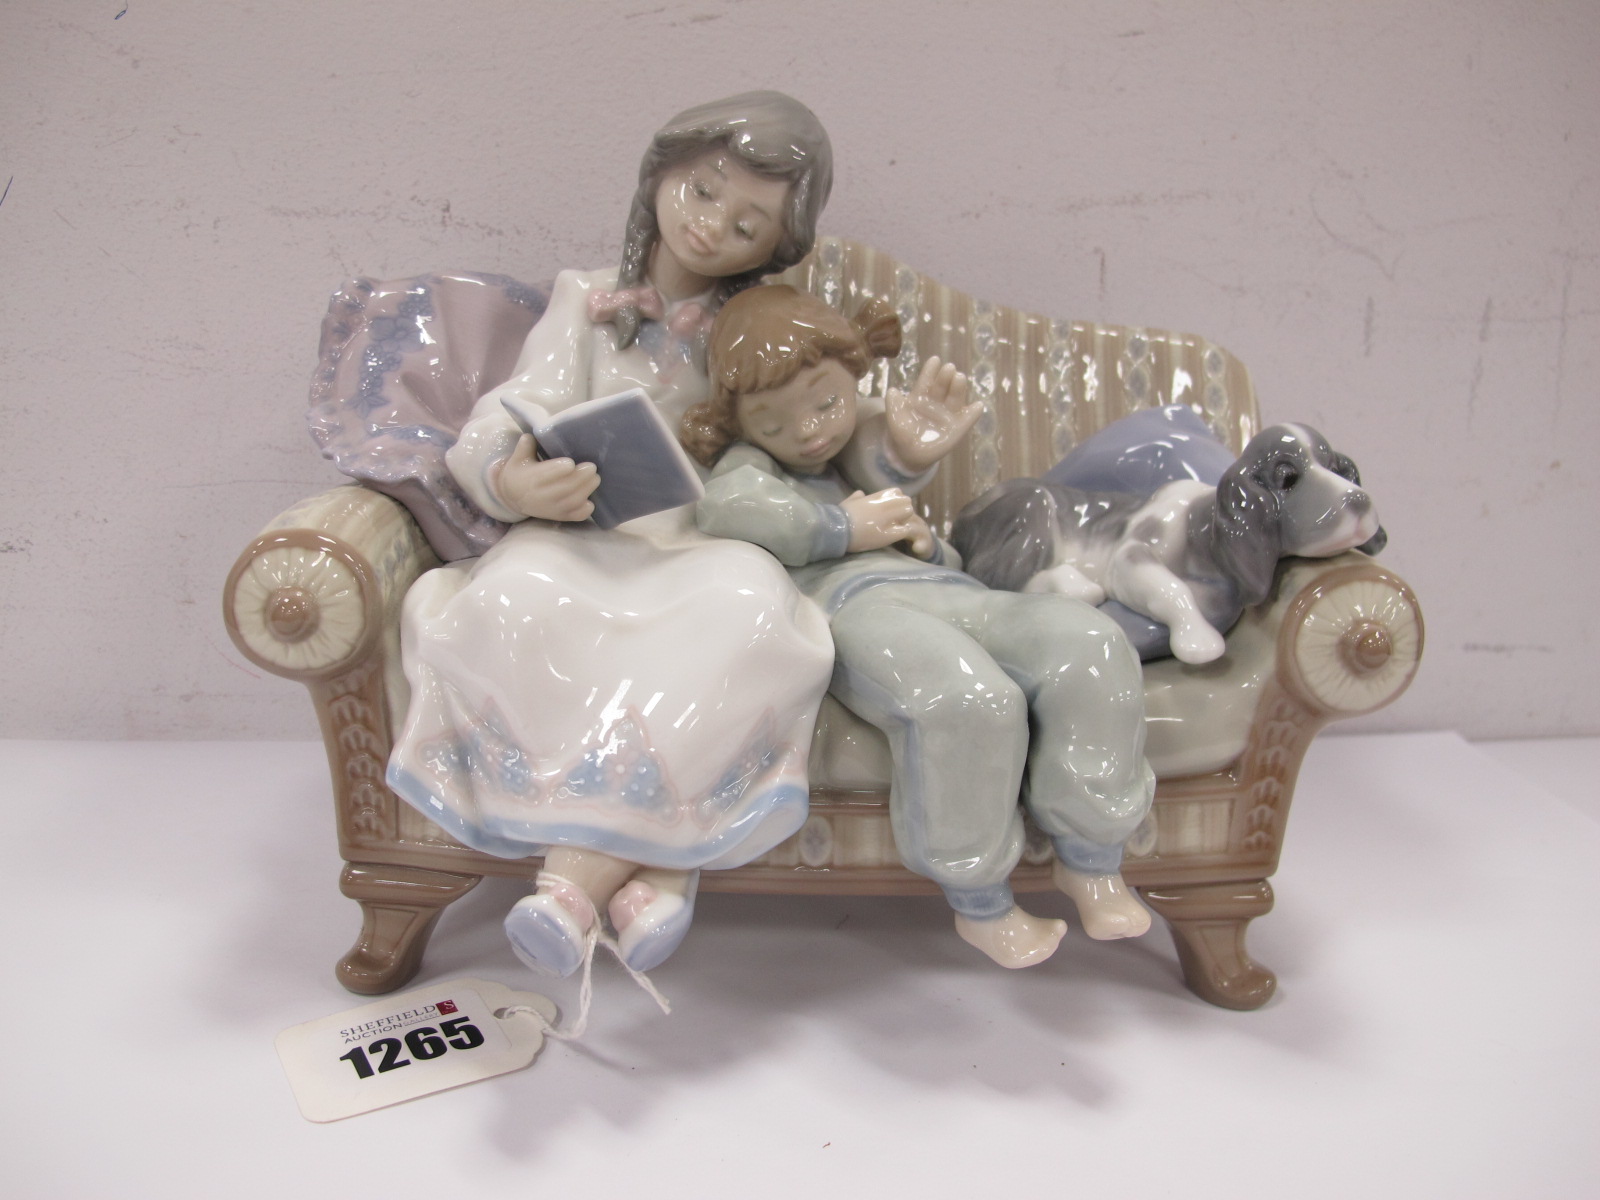 Lladro Pottery Big Sister Figure Group, number 5735.